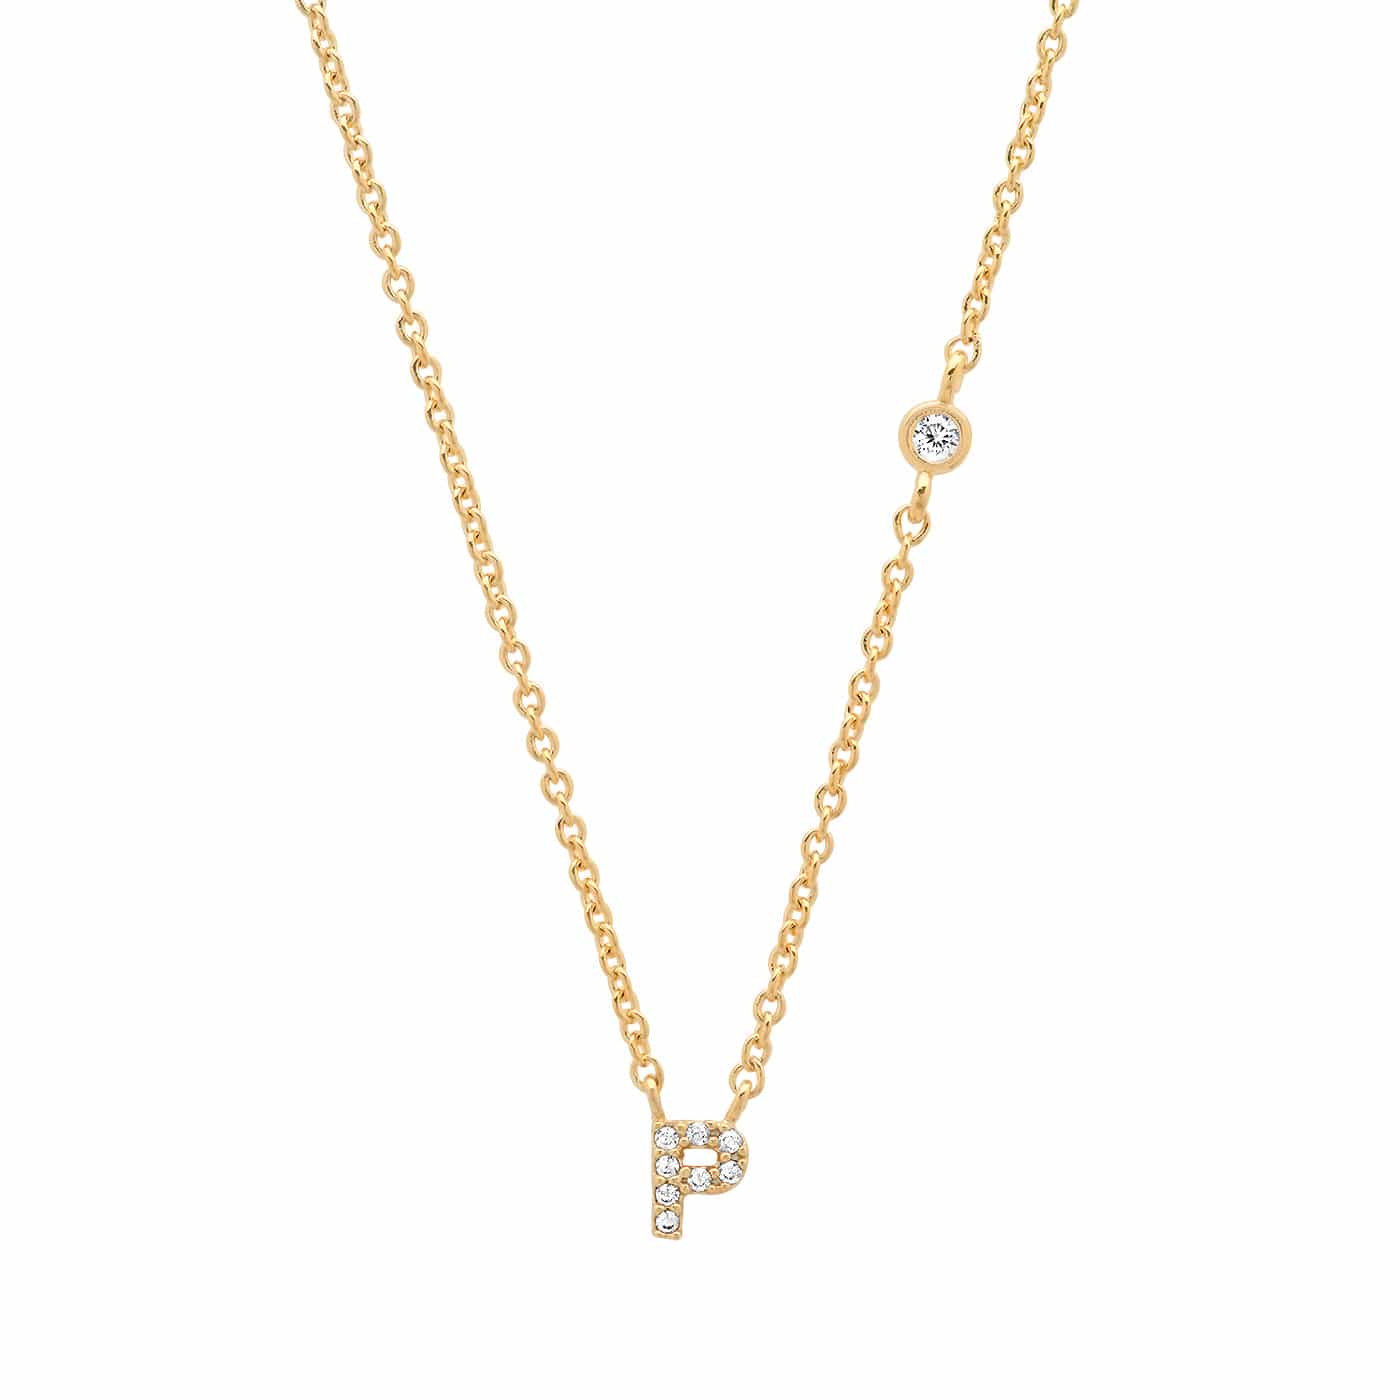 TAI JEWELRY Necklace Gold / P CZ Initial Necklace